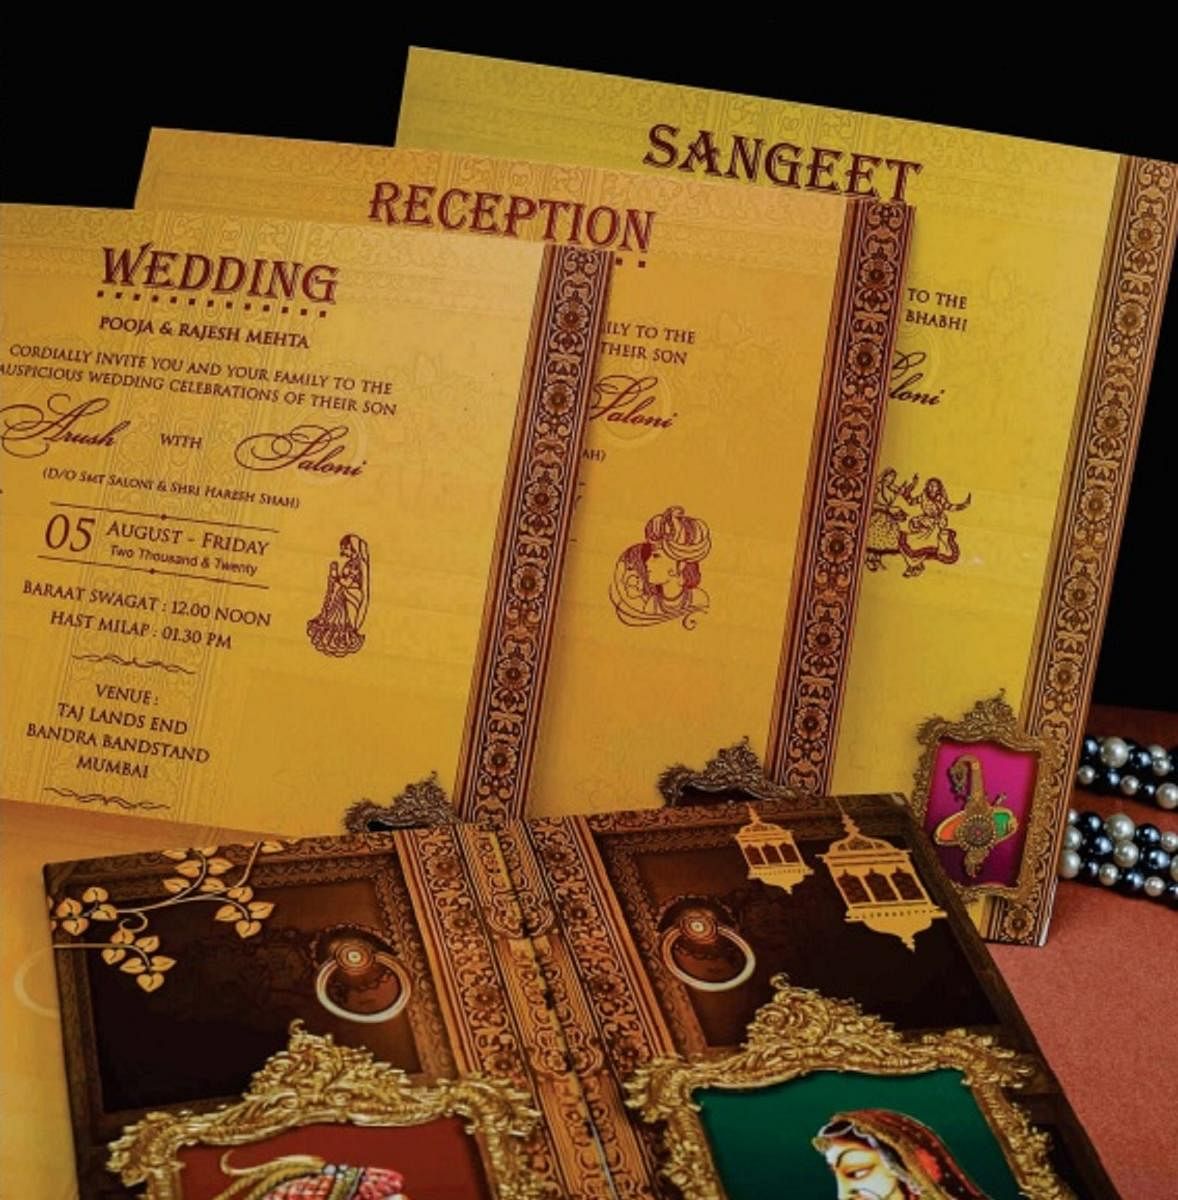 Many customers are also asking for invites for different wedding events.